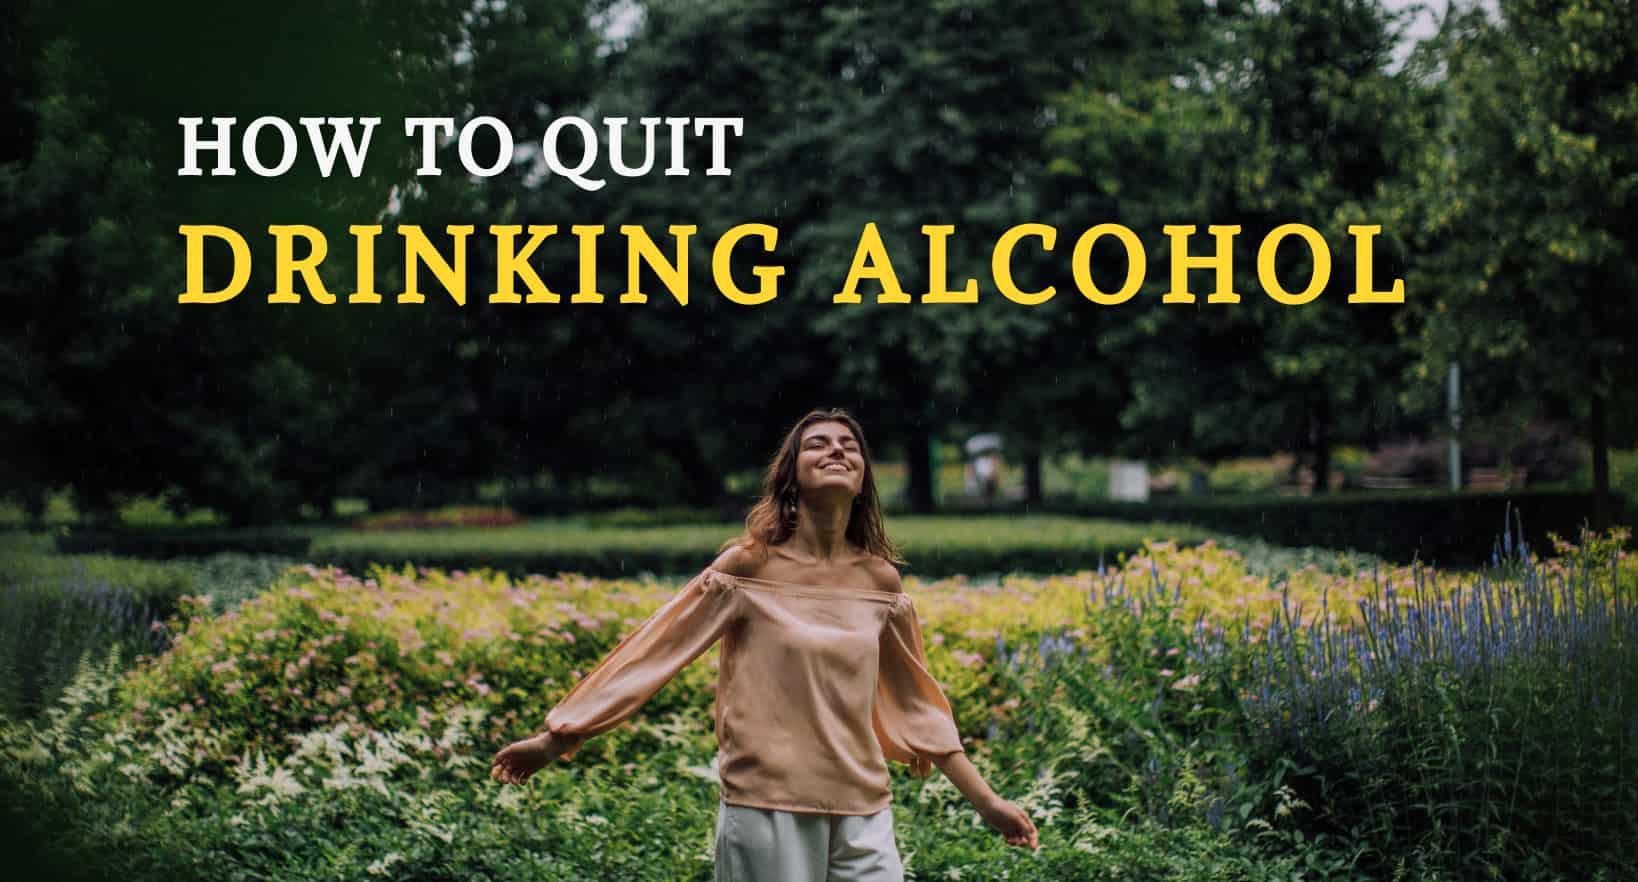 How to Quit Drinking Alcohol (in 2022 and onward)